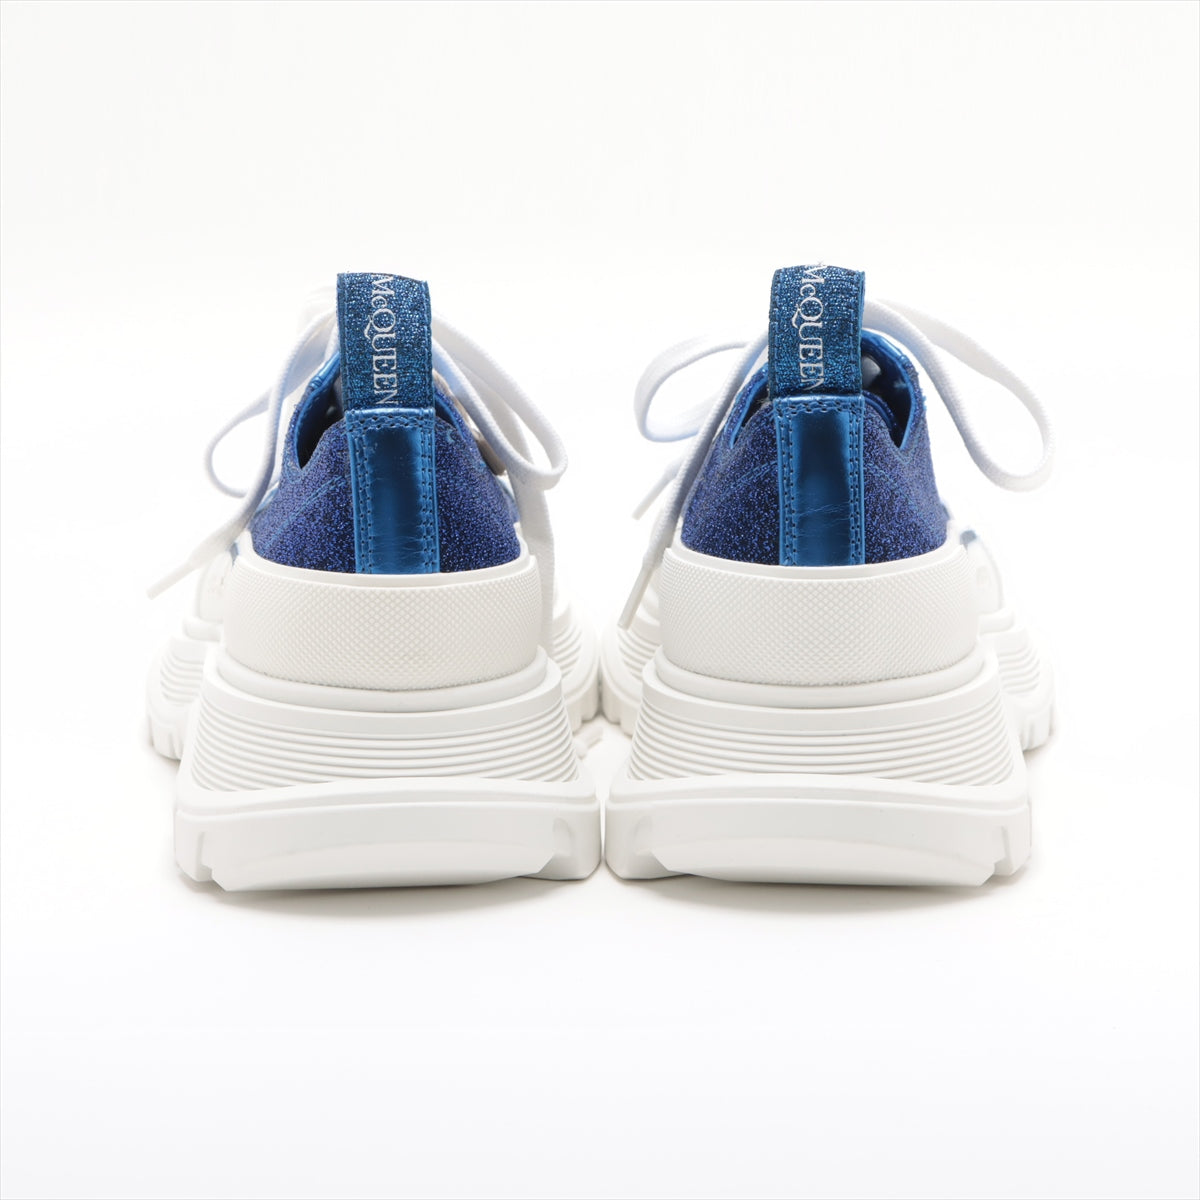 Alexander McQueen Fabric Trainers 37  Blue x White 685707 Glitter Change Himo